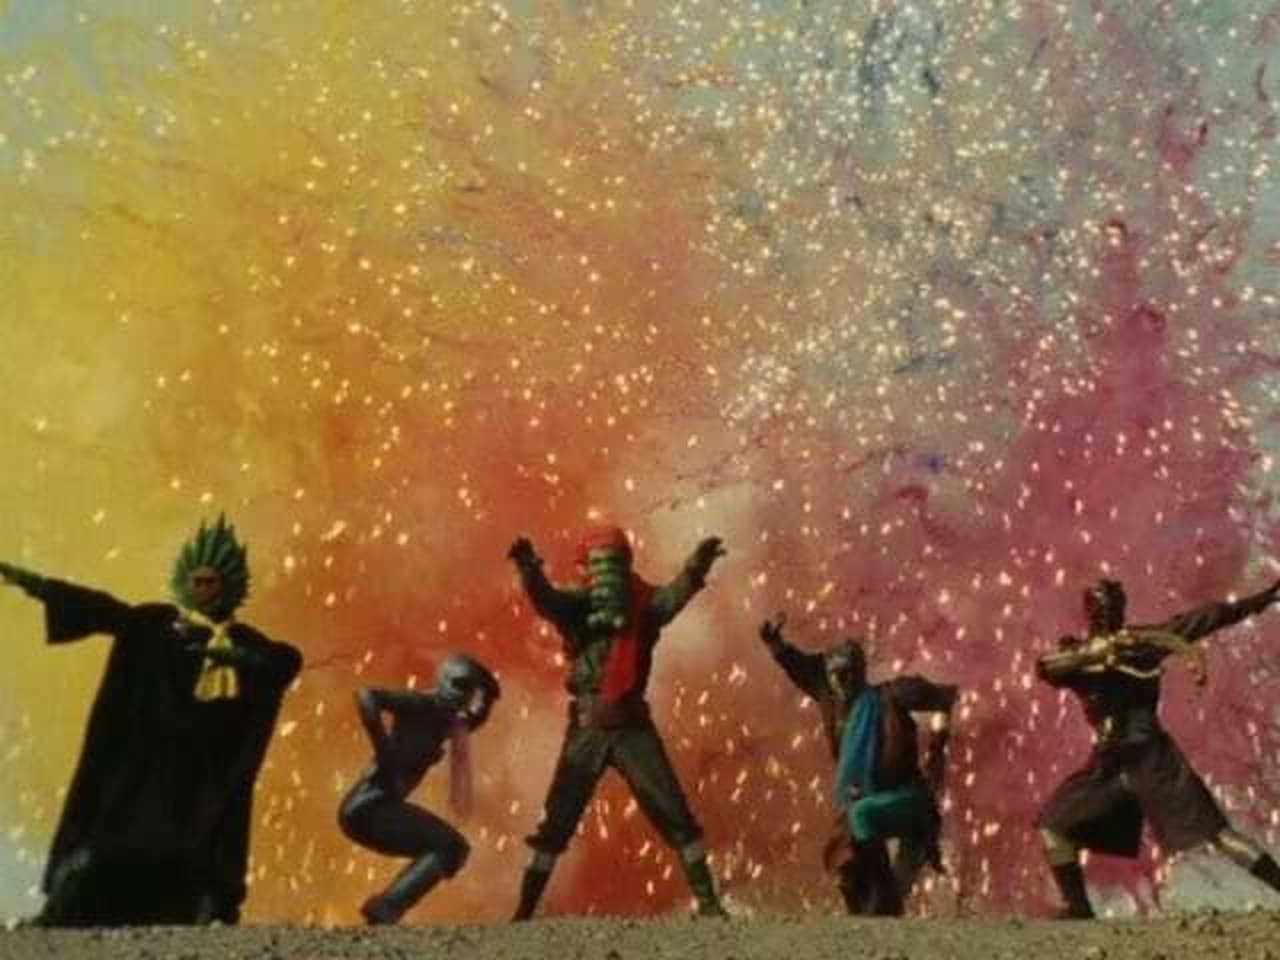 Gingaman Appear